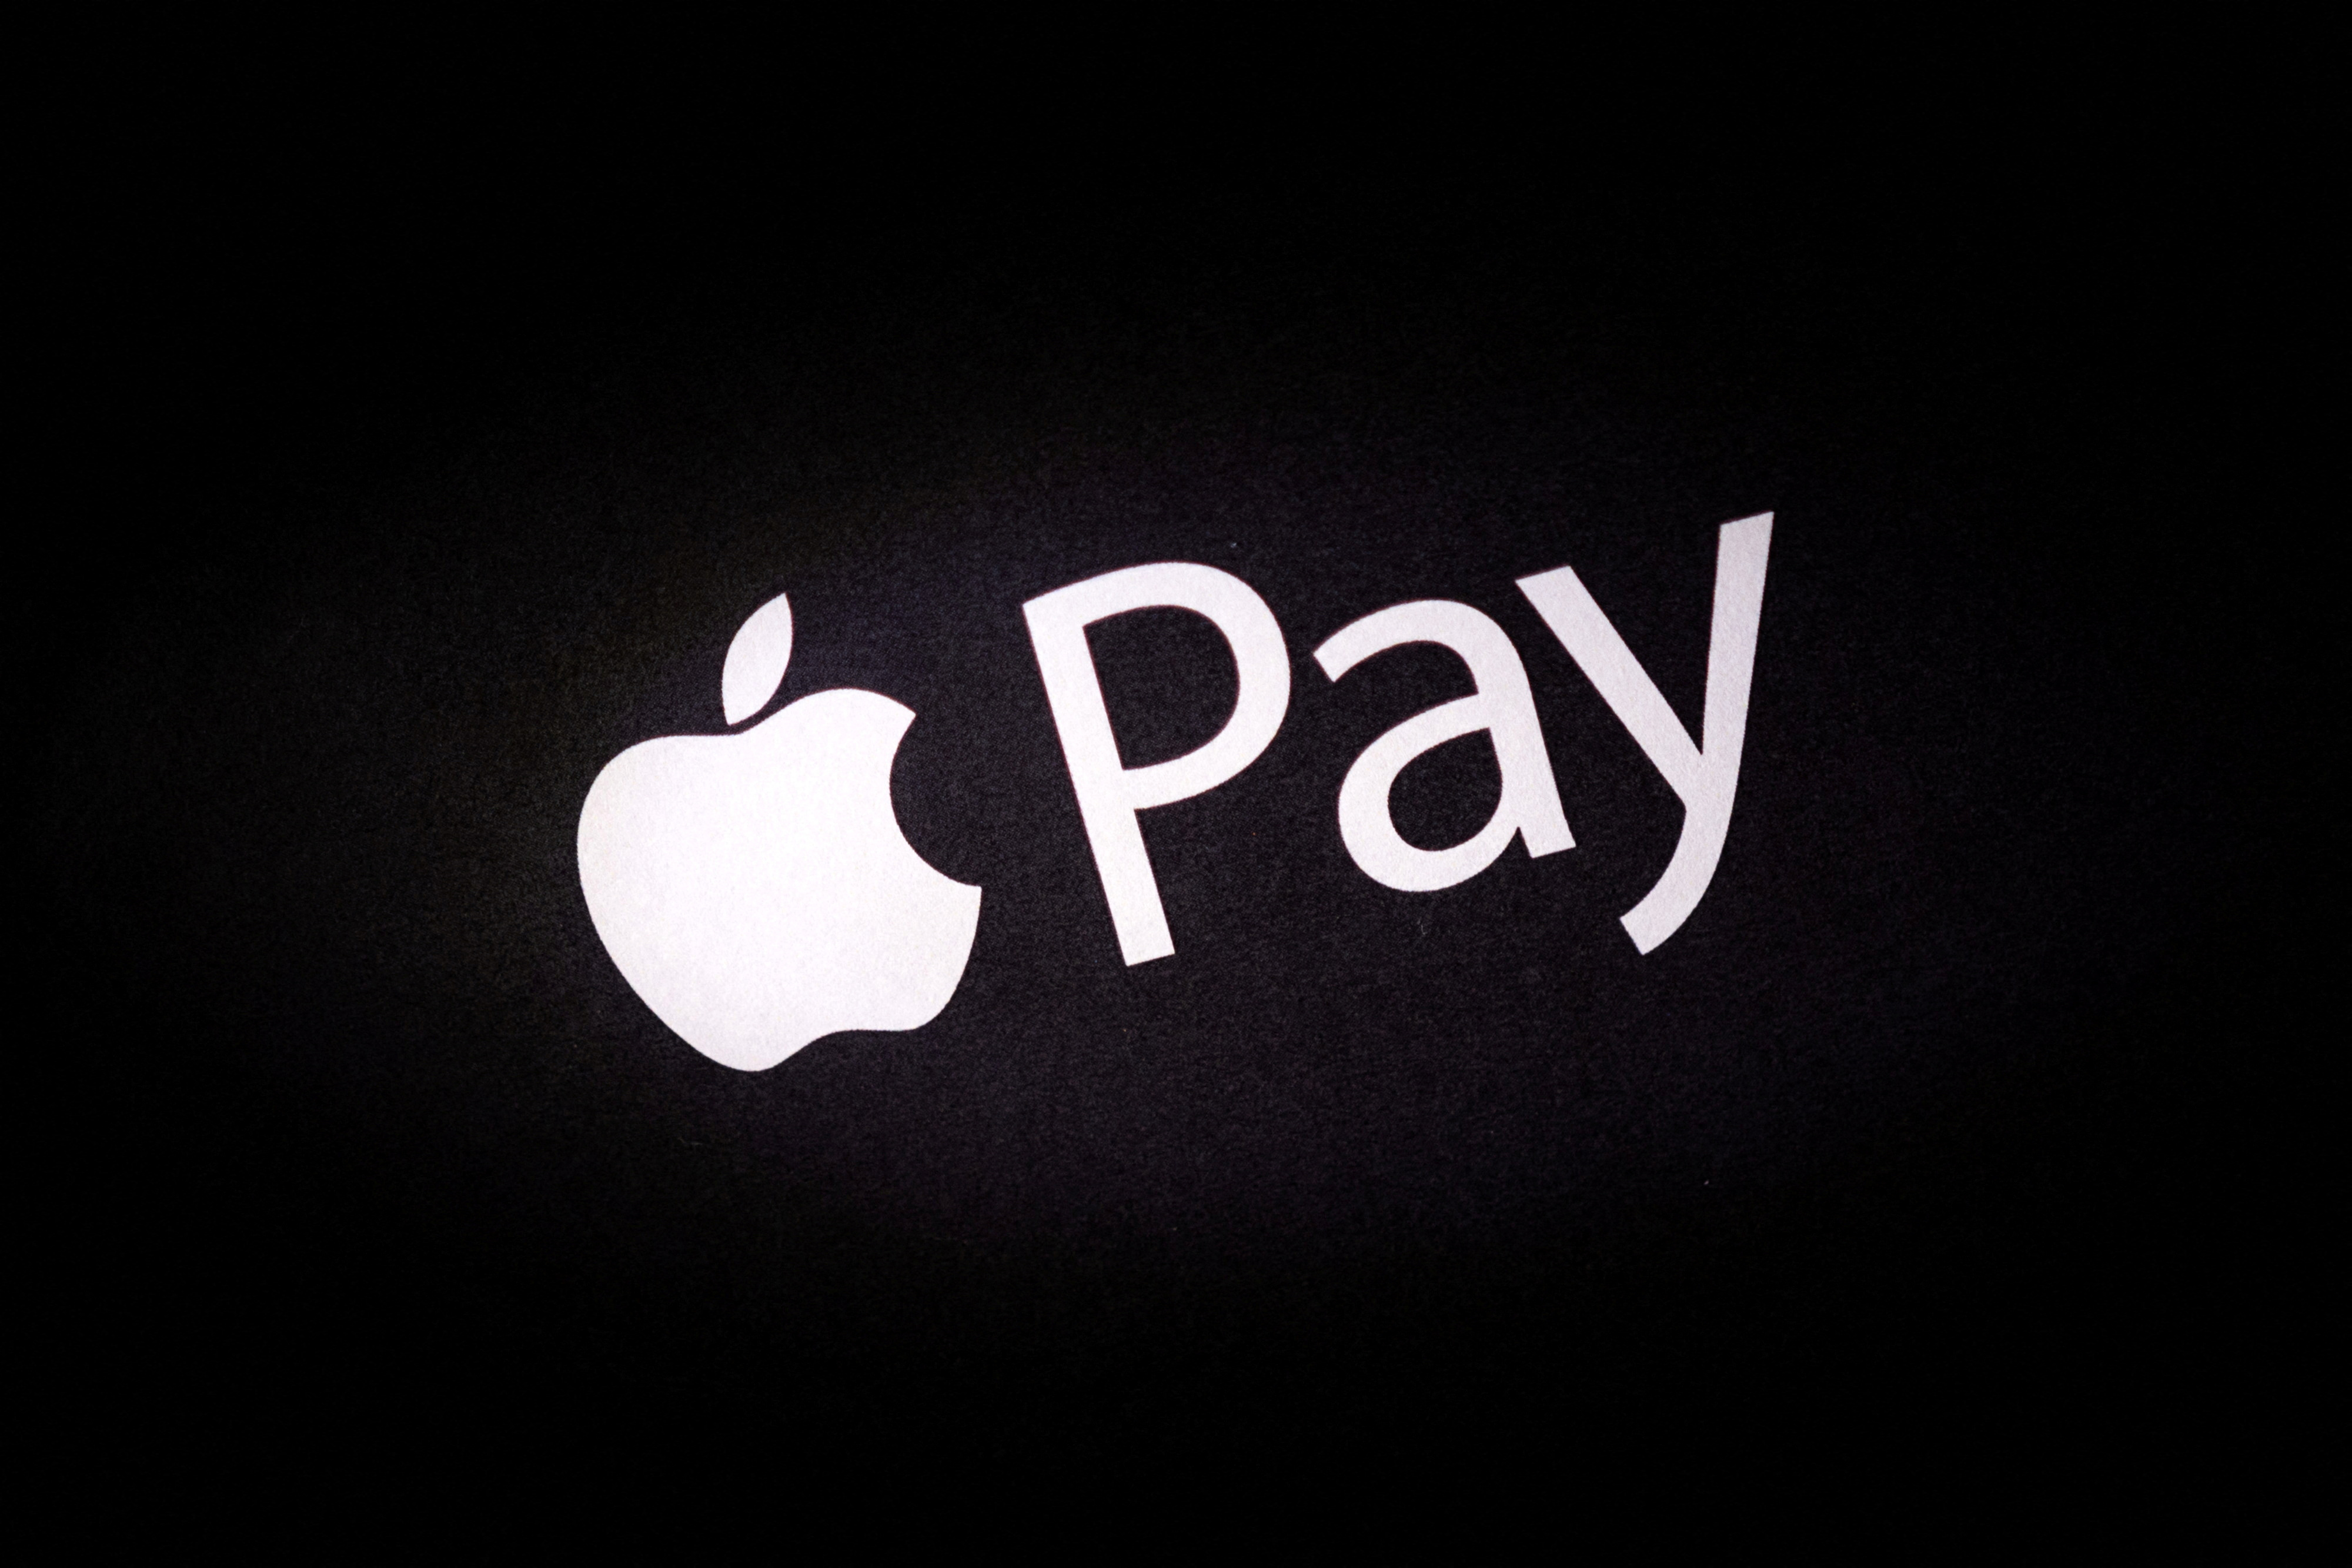 Apple Ordered to Face Antitrust Lawsuit Over Apple Pay, Judge Rules